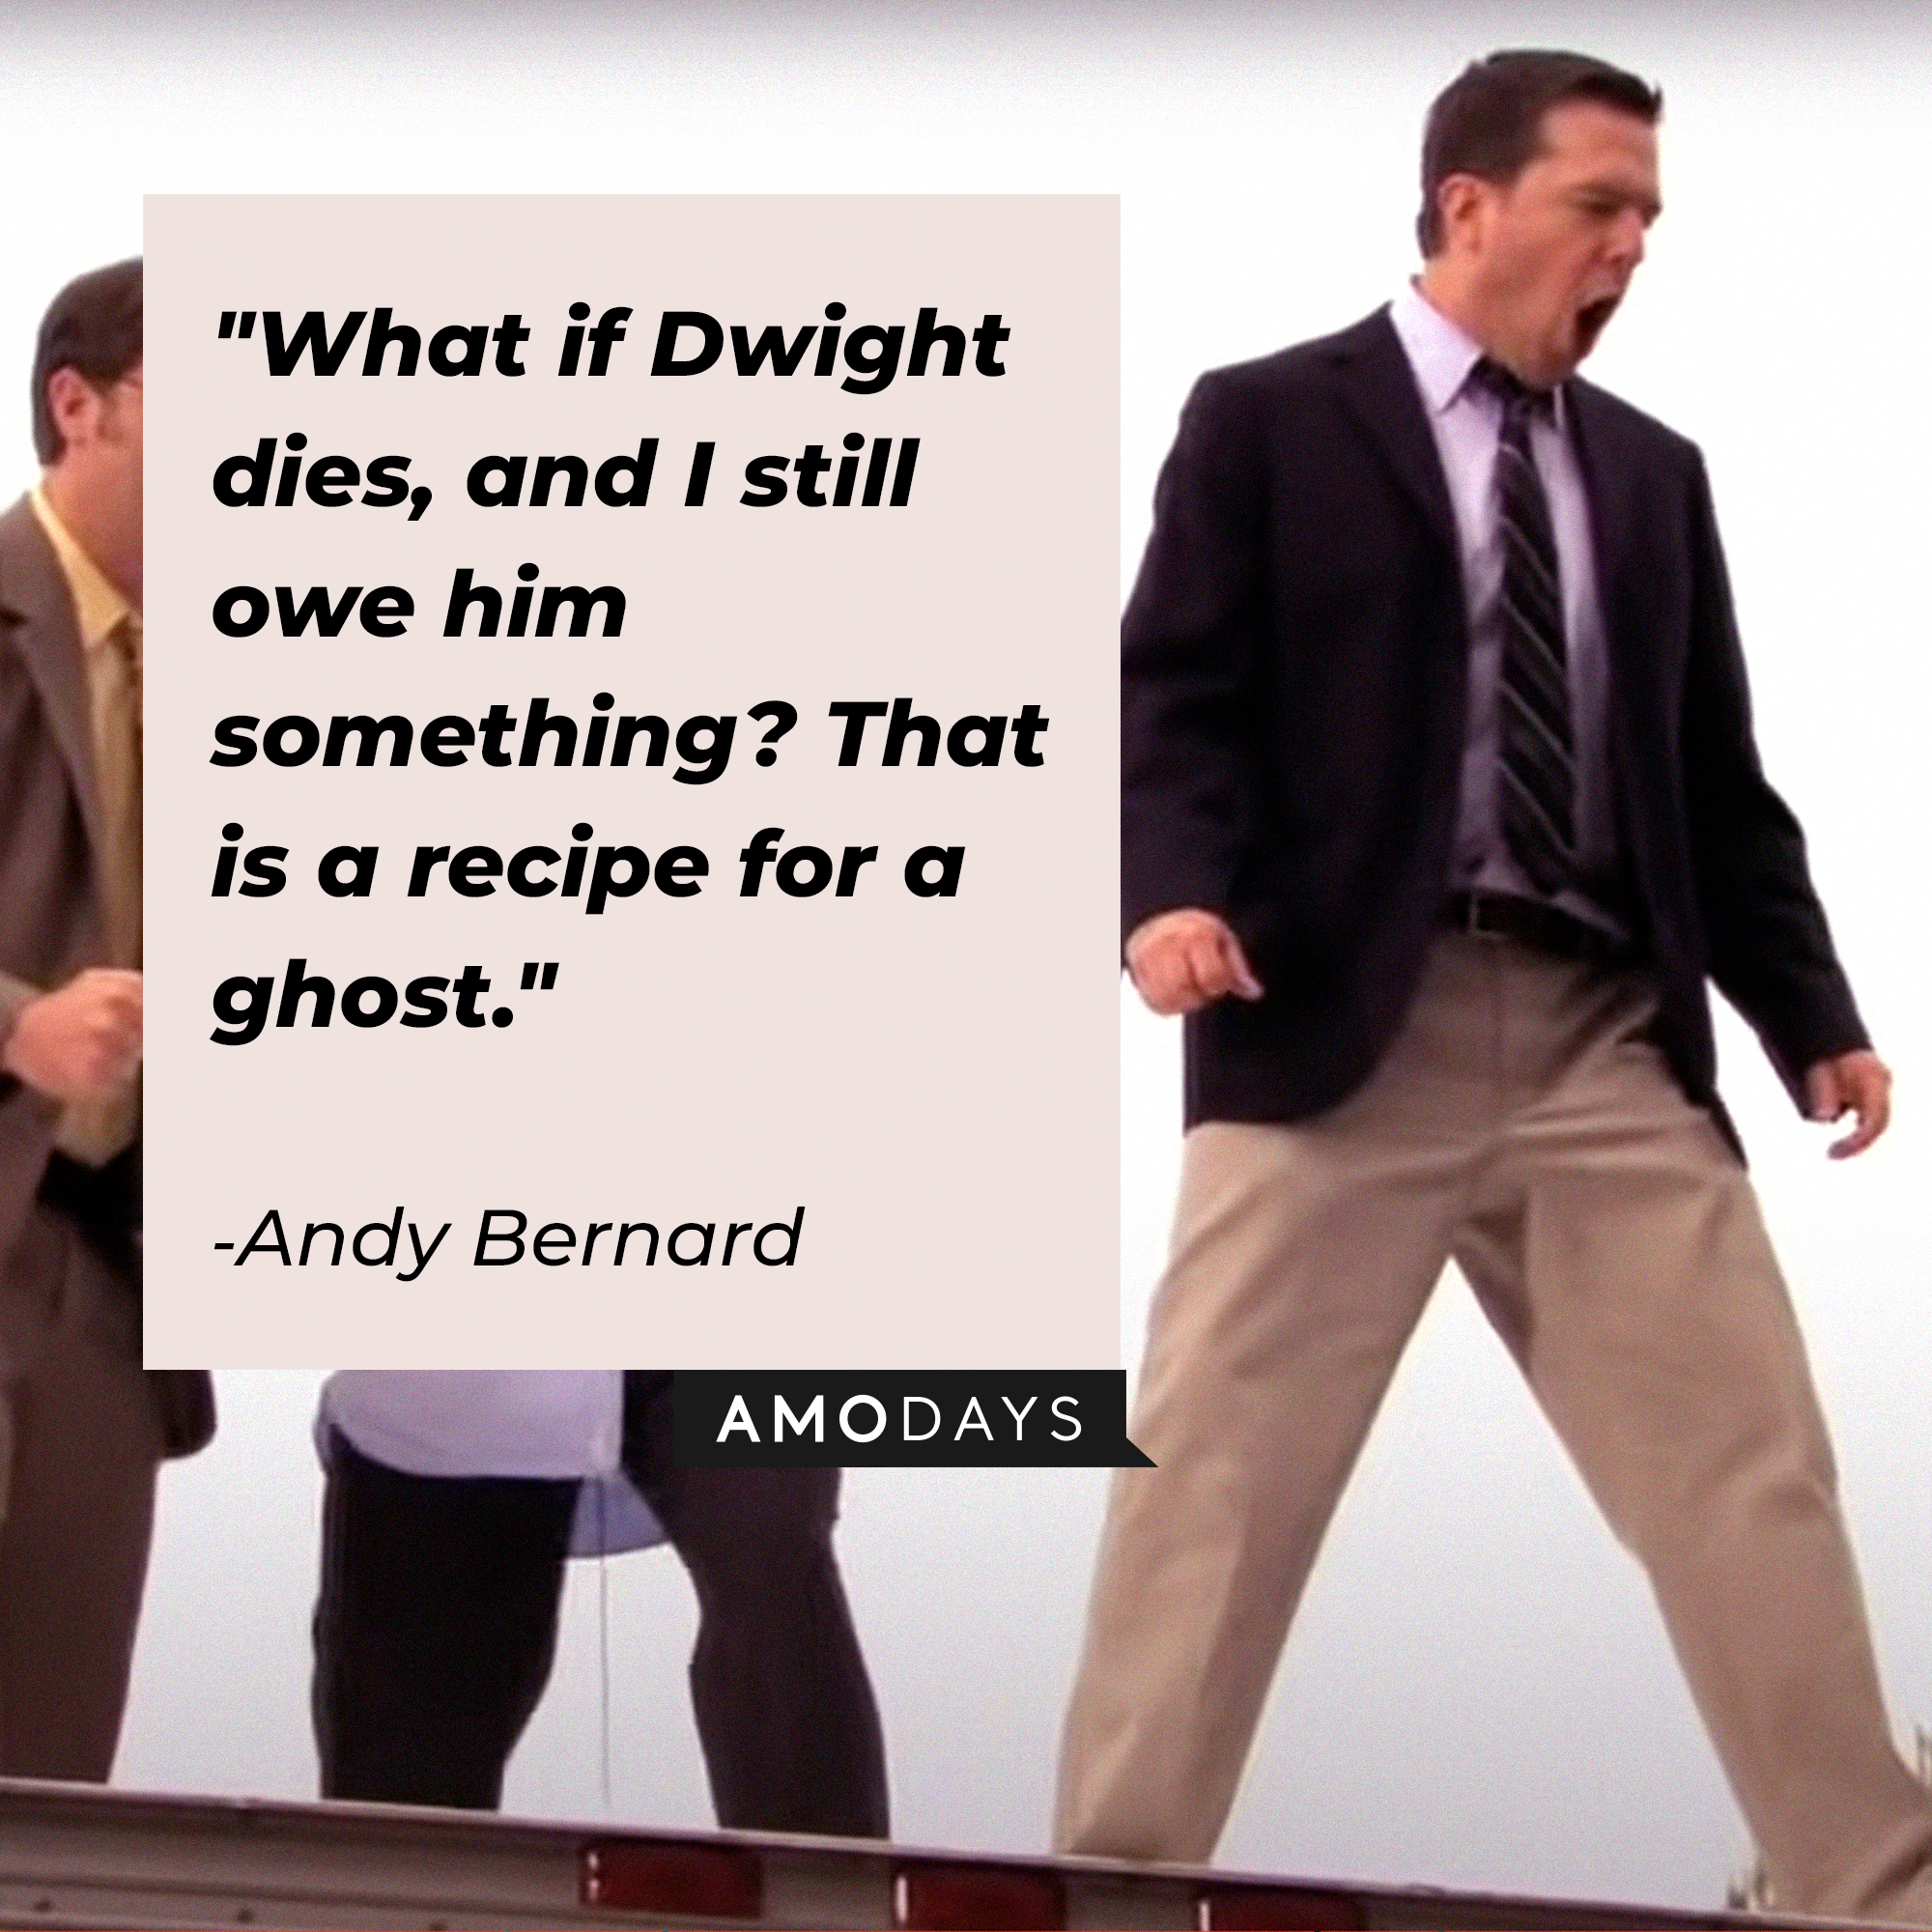 Andy Bernard, with his quote: “What if Dwight dies, and I still owe him something? That is a recipe for a ghost.”│ Source: youtube.com/TheOffice